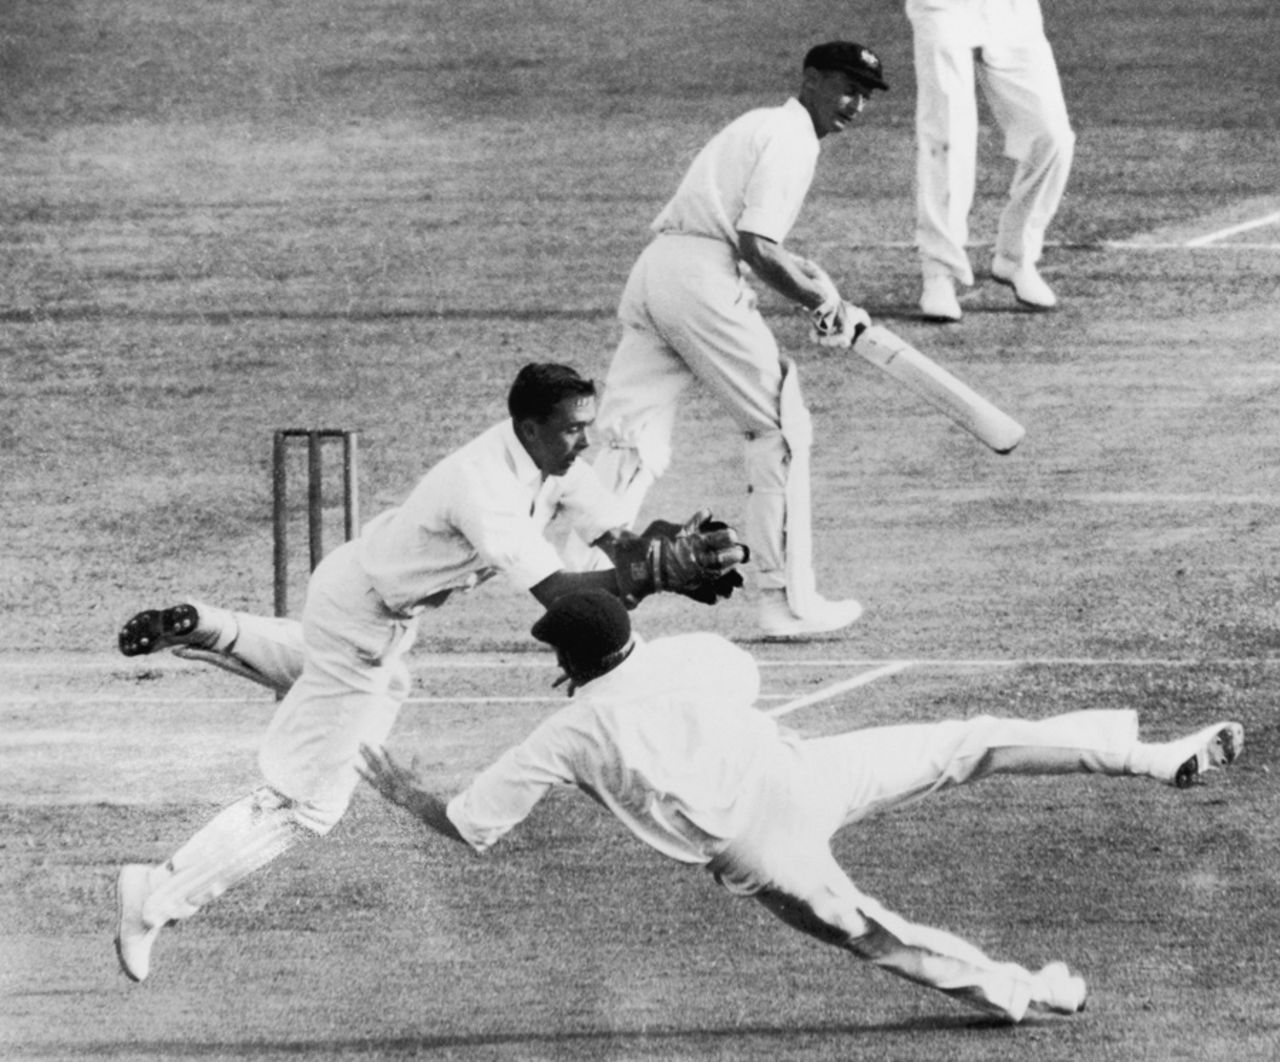 Denis Lindsay dives to catch Brian Booth for 58 off the bowling of Trevor Goddard, Australia v South Africa, 4th Test, Adelaide, 1st day, January 24, 1964